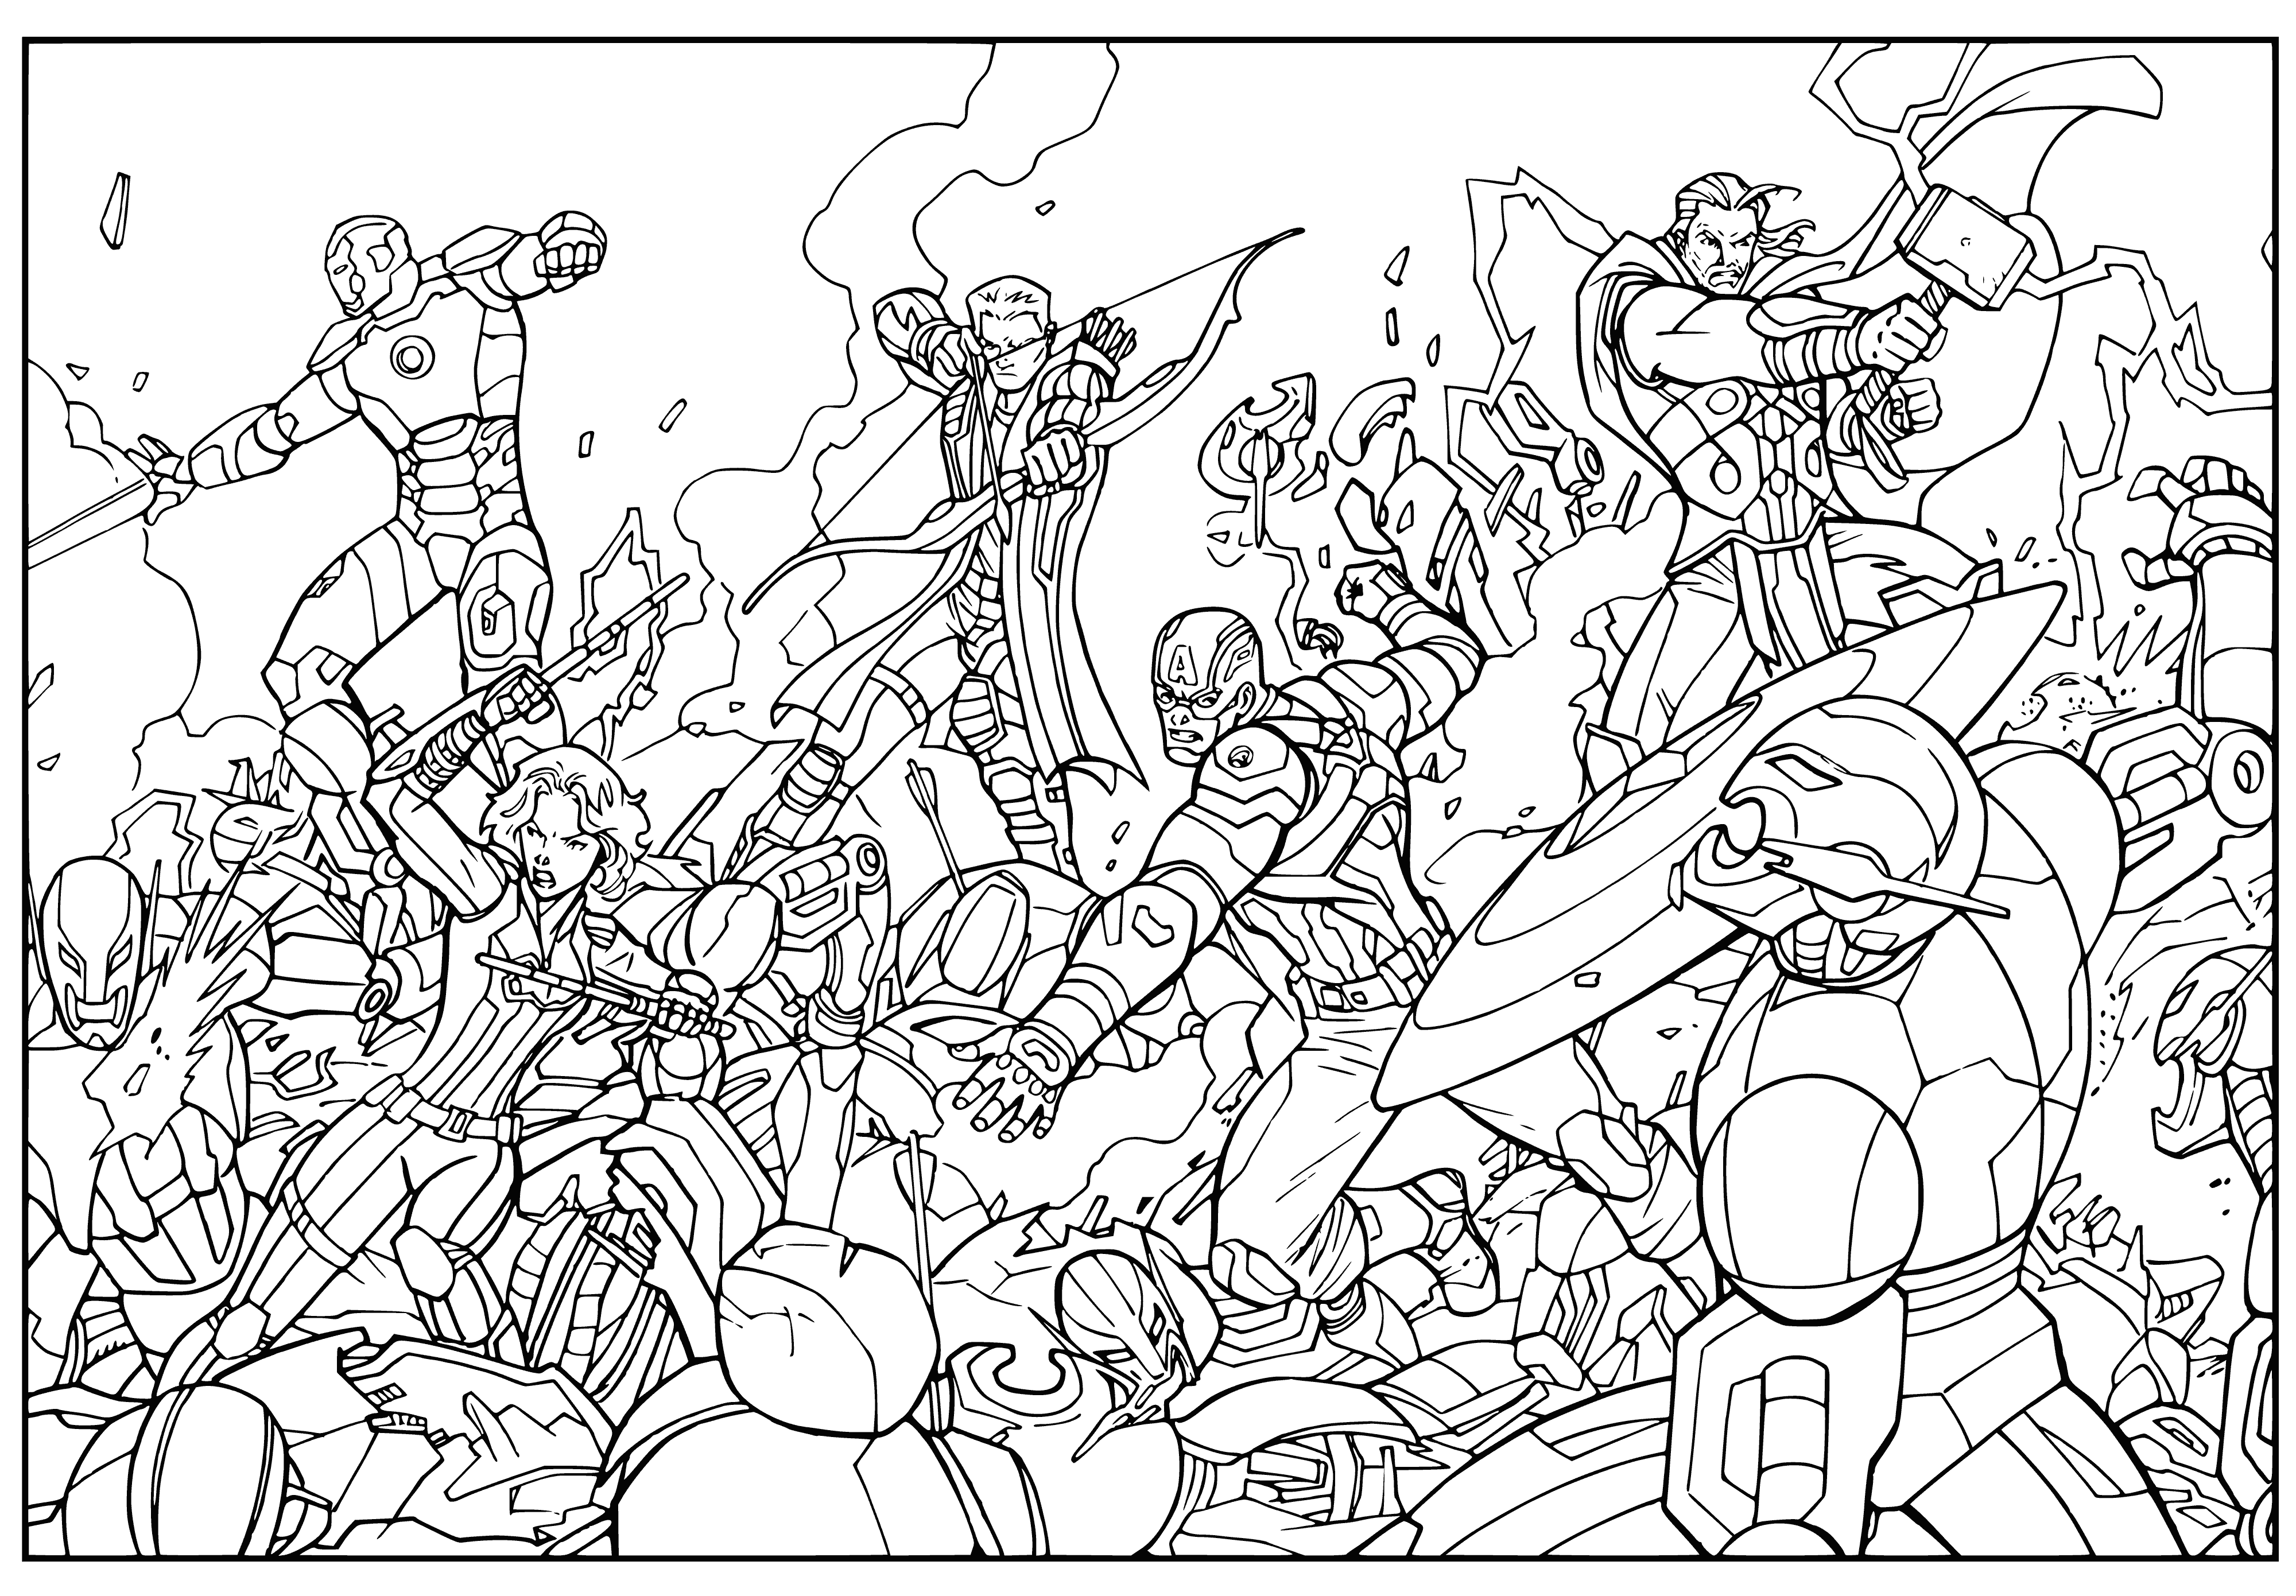 Avengers battle Ultron's robot army coloring page